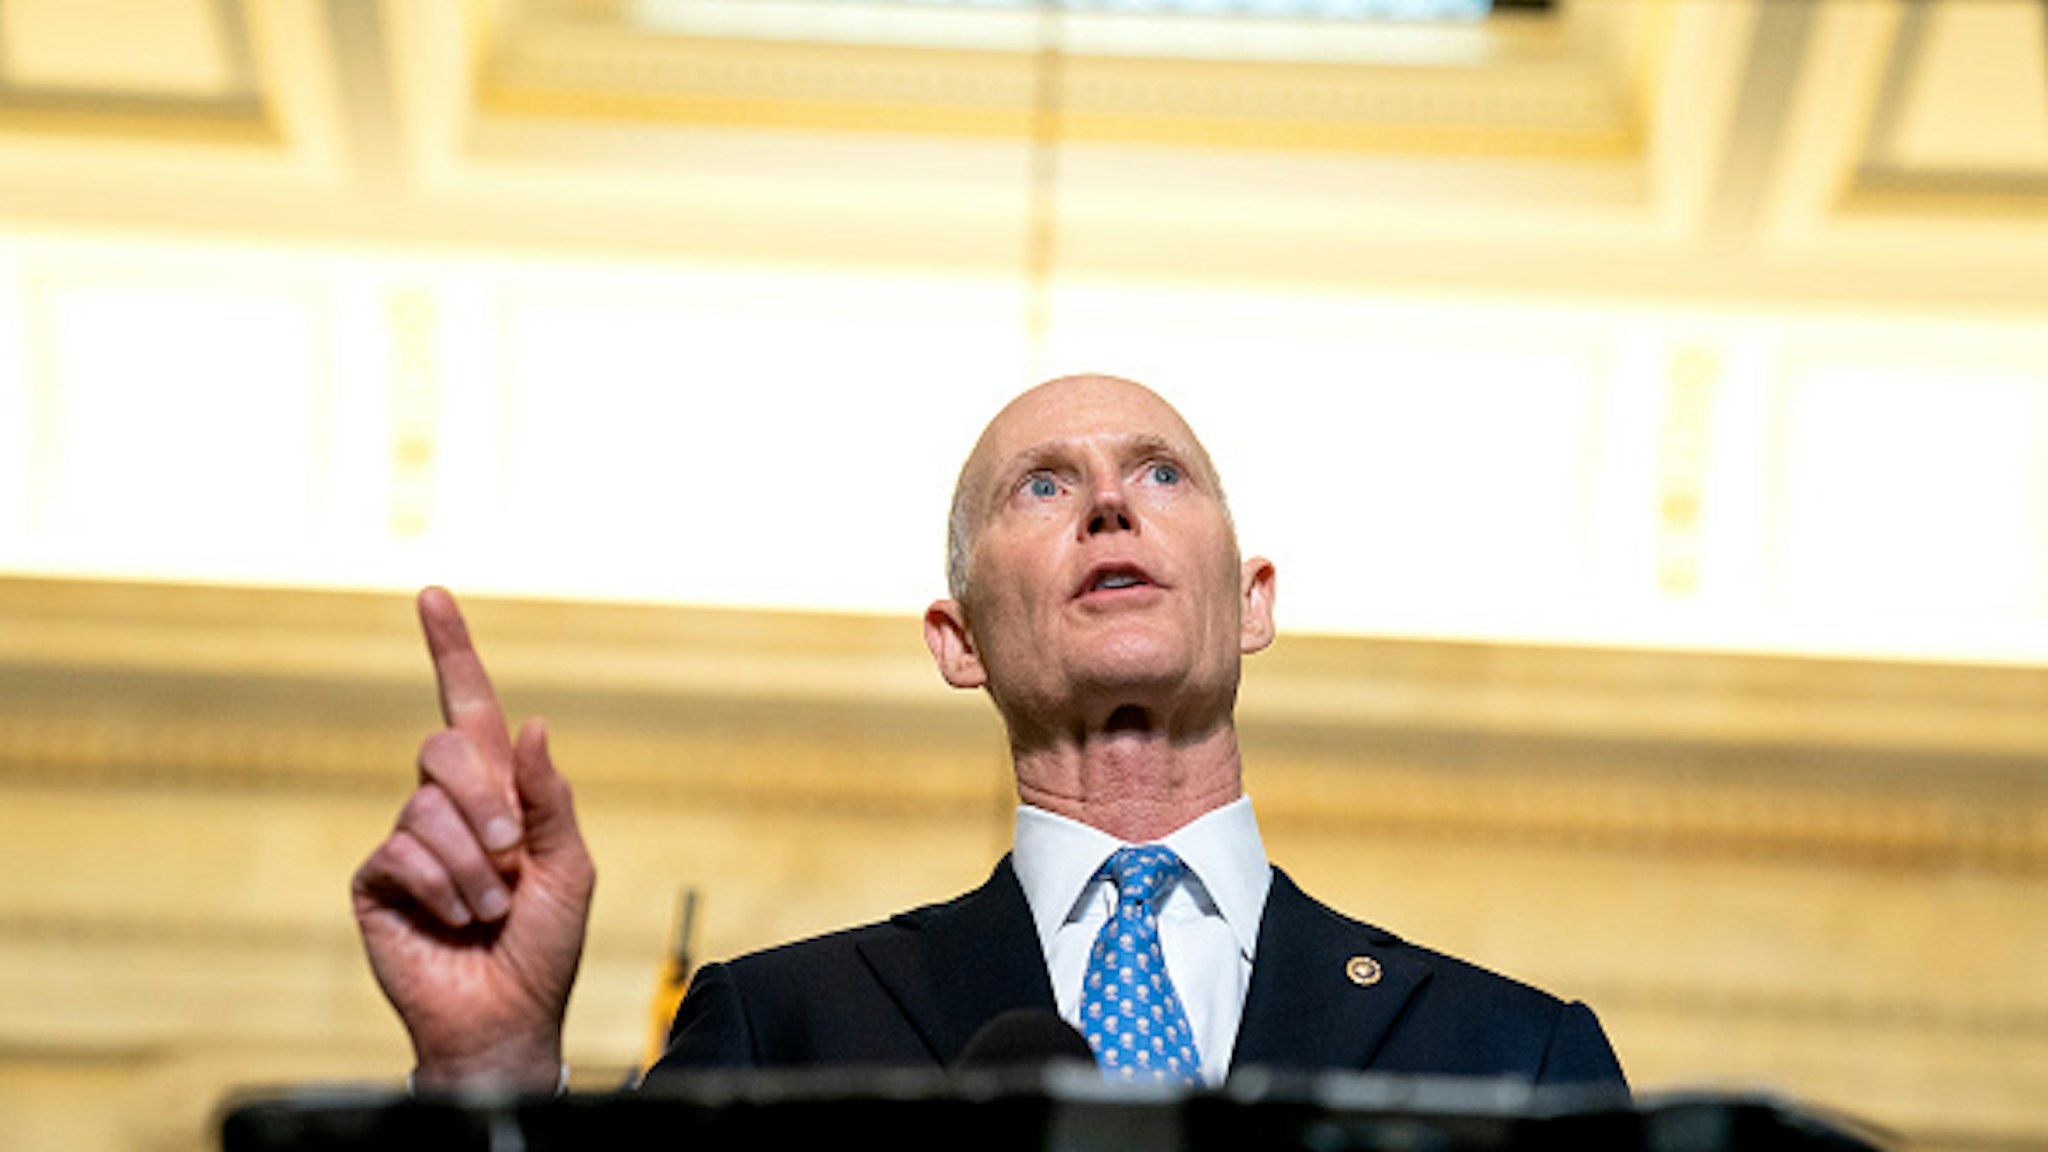 WASHINGTON, DC - APRIL 13: Senator Rick Scott (R-FL) speaks to reporters following Senate Republican Policy luncheons at the Russell Senate Office Building on Capitol Hill on April 13, 2021 in Washington, DC. Senate Republicans criticized U.S. President Joe Bidens plan to remove all troops from Afghanistan by September 11, which has been delayed from its initial deadline of May 1.